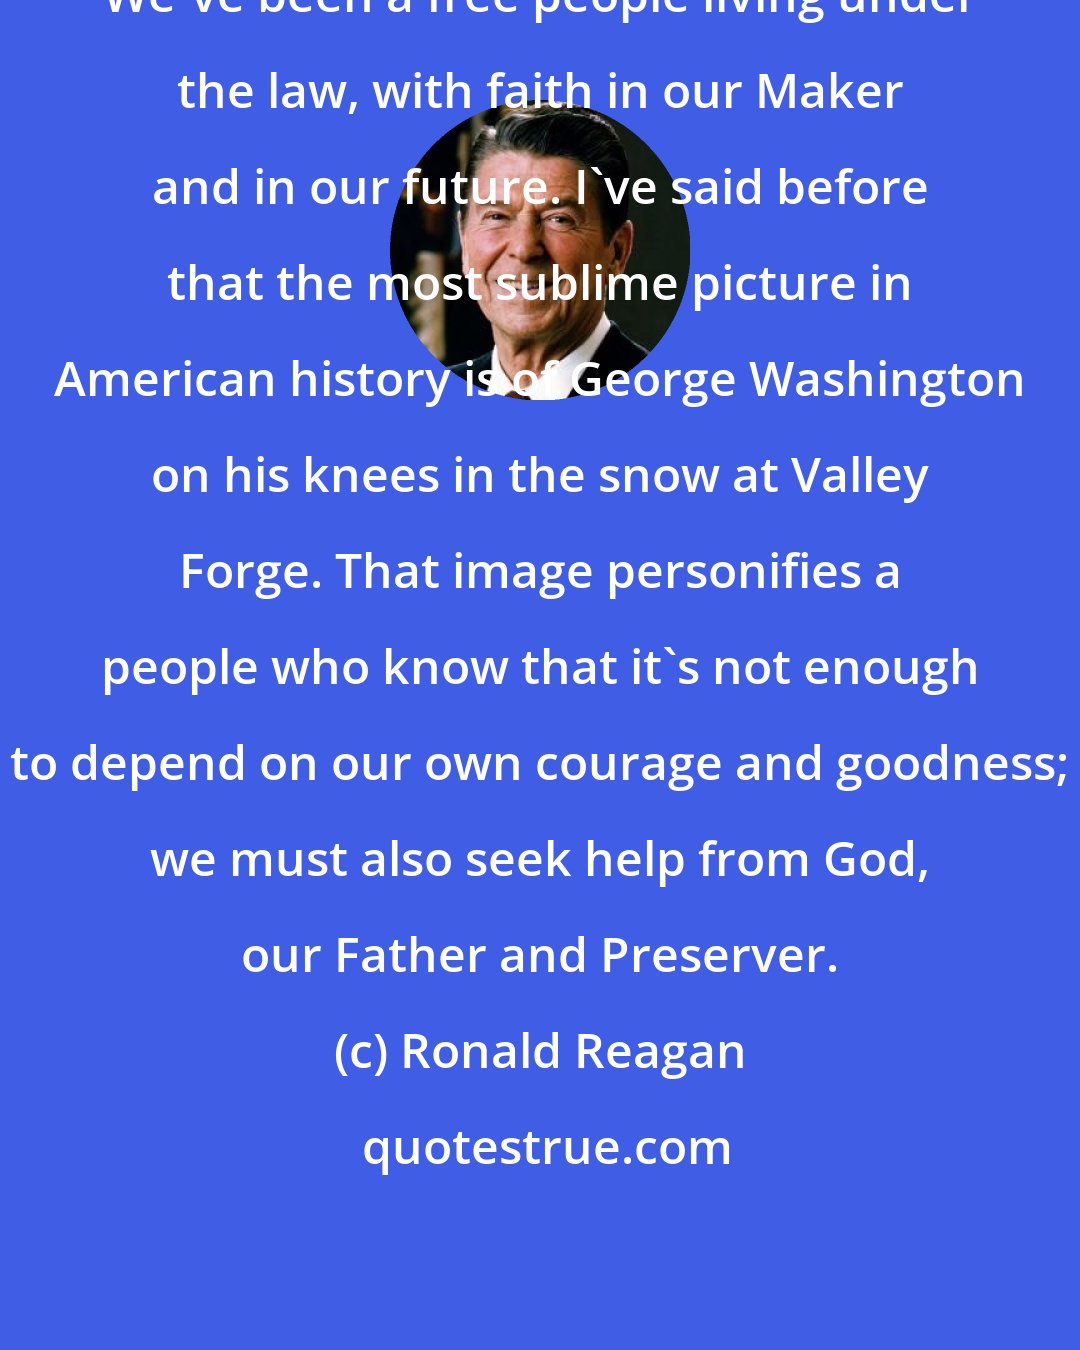 Ronald Reagan: We've been a free people living under the law, with faith in our Maker and in our future. I've said before that the most sublime picture in American history is of George Washington on his knees in the snow at Valley Forge. That image personifies a people who know that it's not enough to depend on our own courage and goodness; we must also seek help from God, our Father and Preserver.